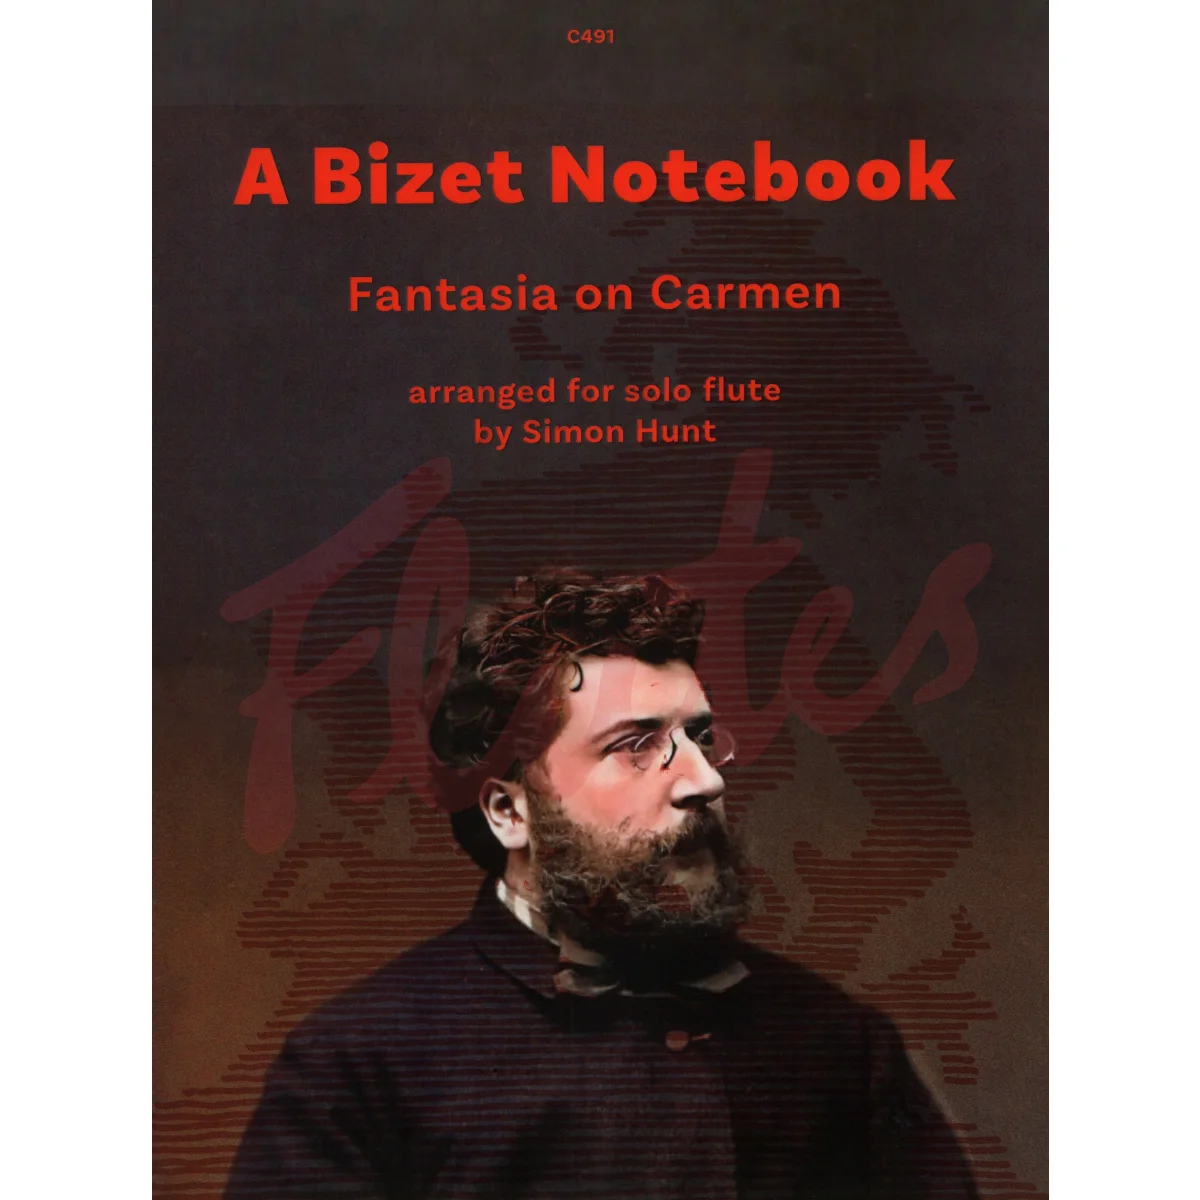 A Bizet Notebook for Solo Flute